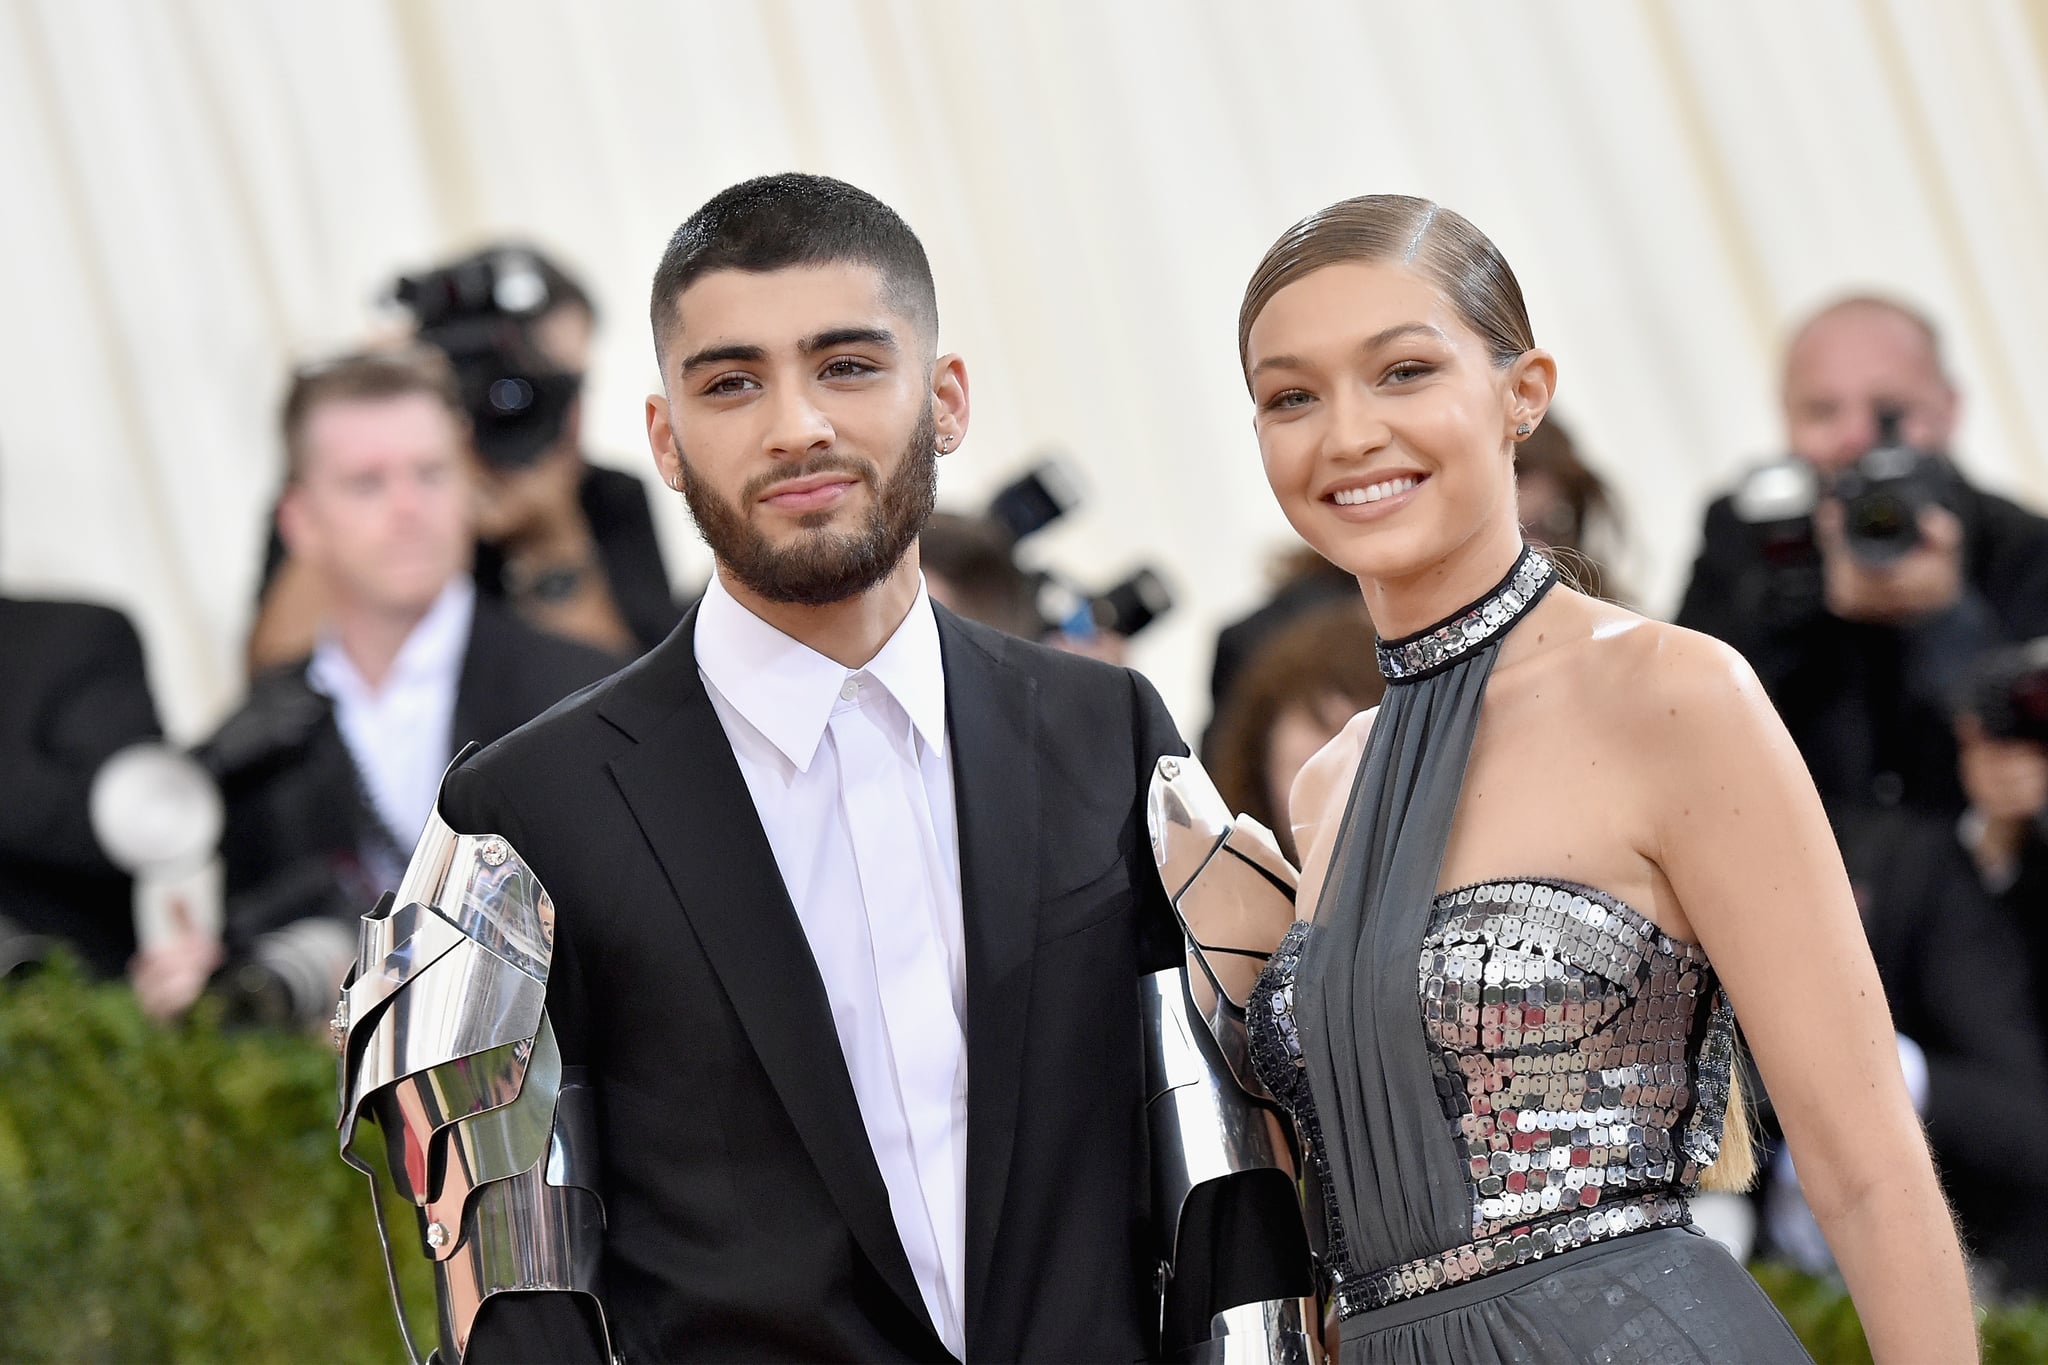 Gigi Hadid Is a Mom! The Model Gives Birth to First Child With Zayn Malik